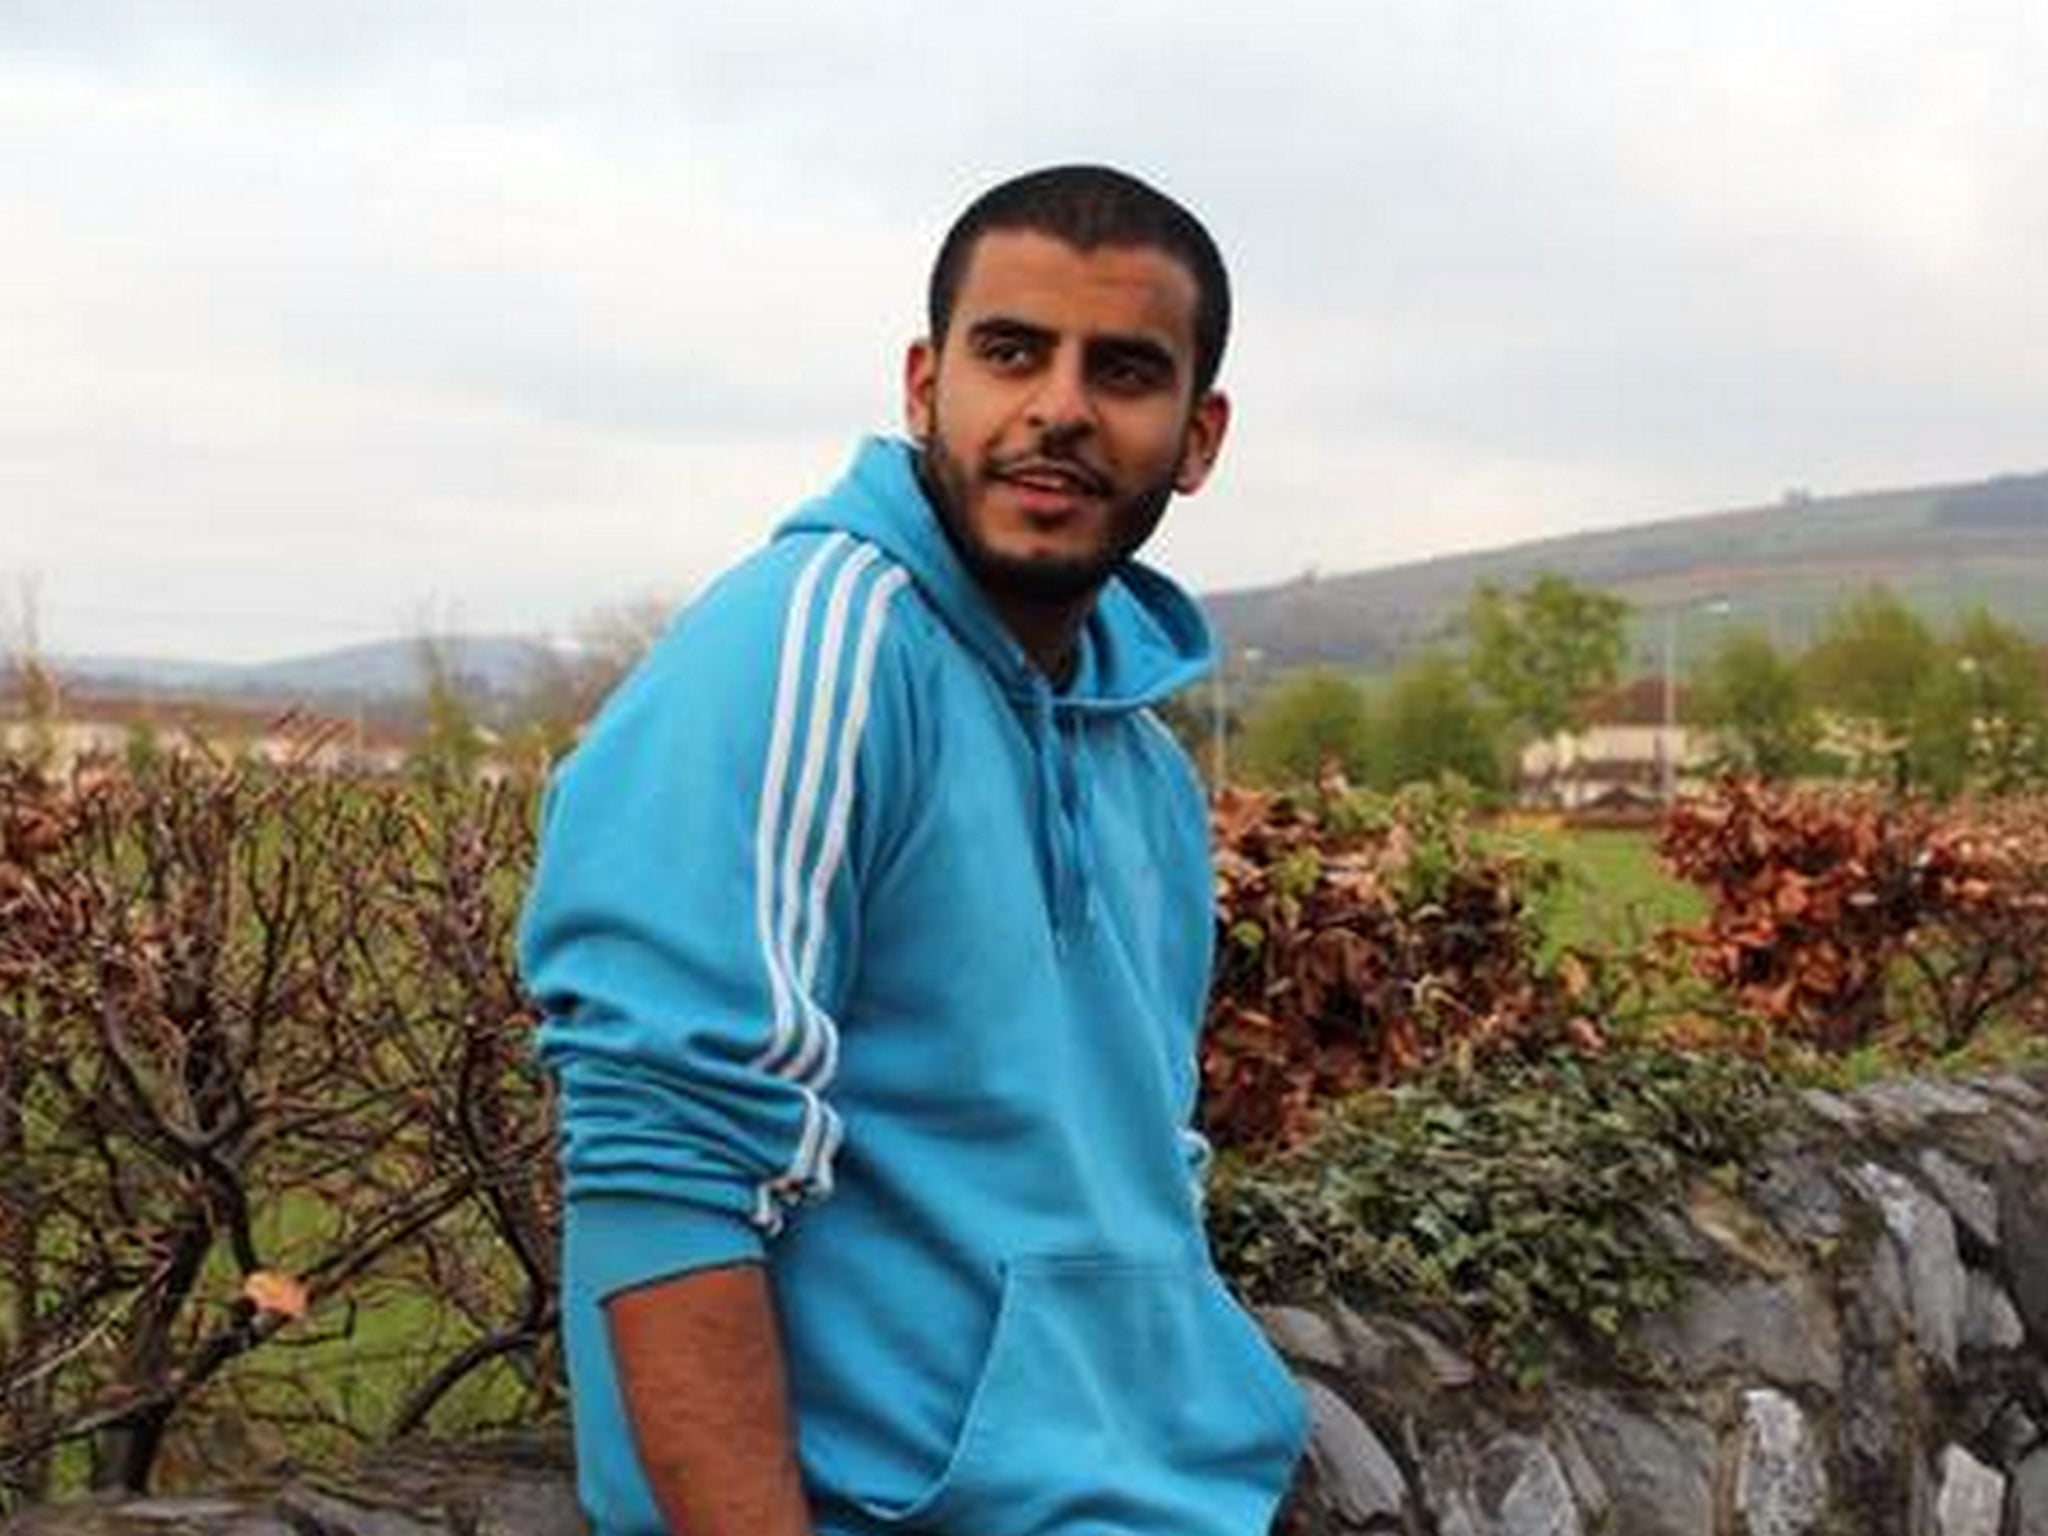 Dublin-born Ibrahim Halawa, now 18, was arrested with his three sisters after being caught up in protests in Cairo in August 2013